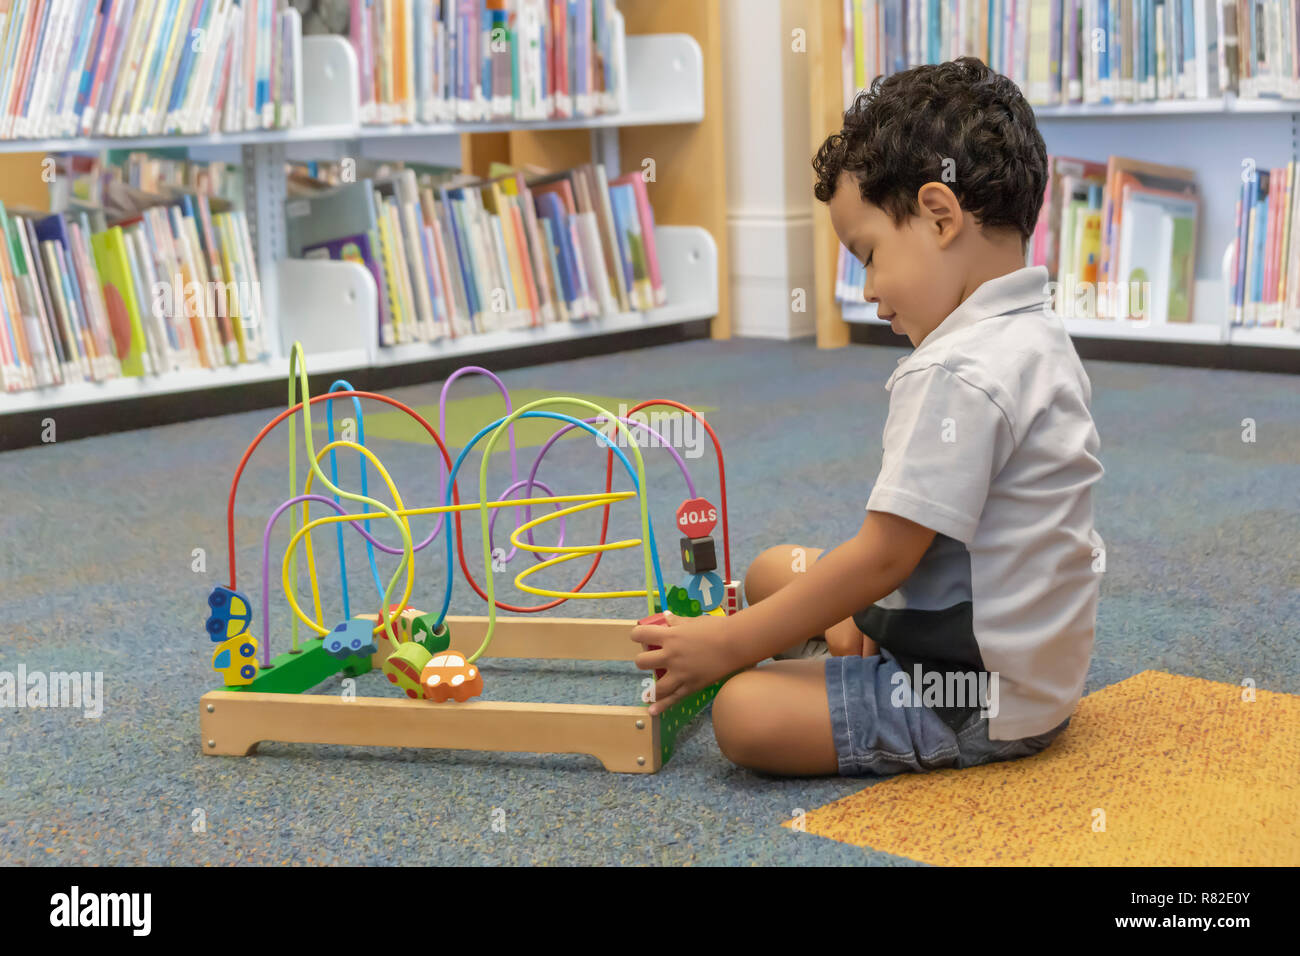 Profile of a little boy at play on the carpeted library floor.  Alone and happy in the corner play area at daycare. Stock Photo